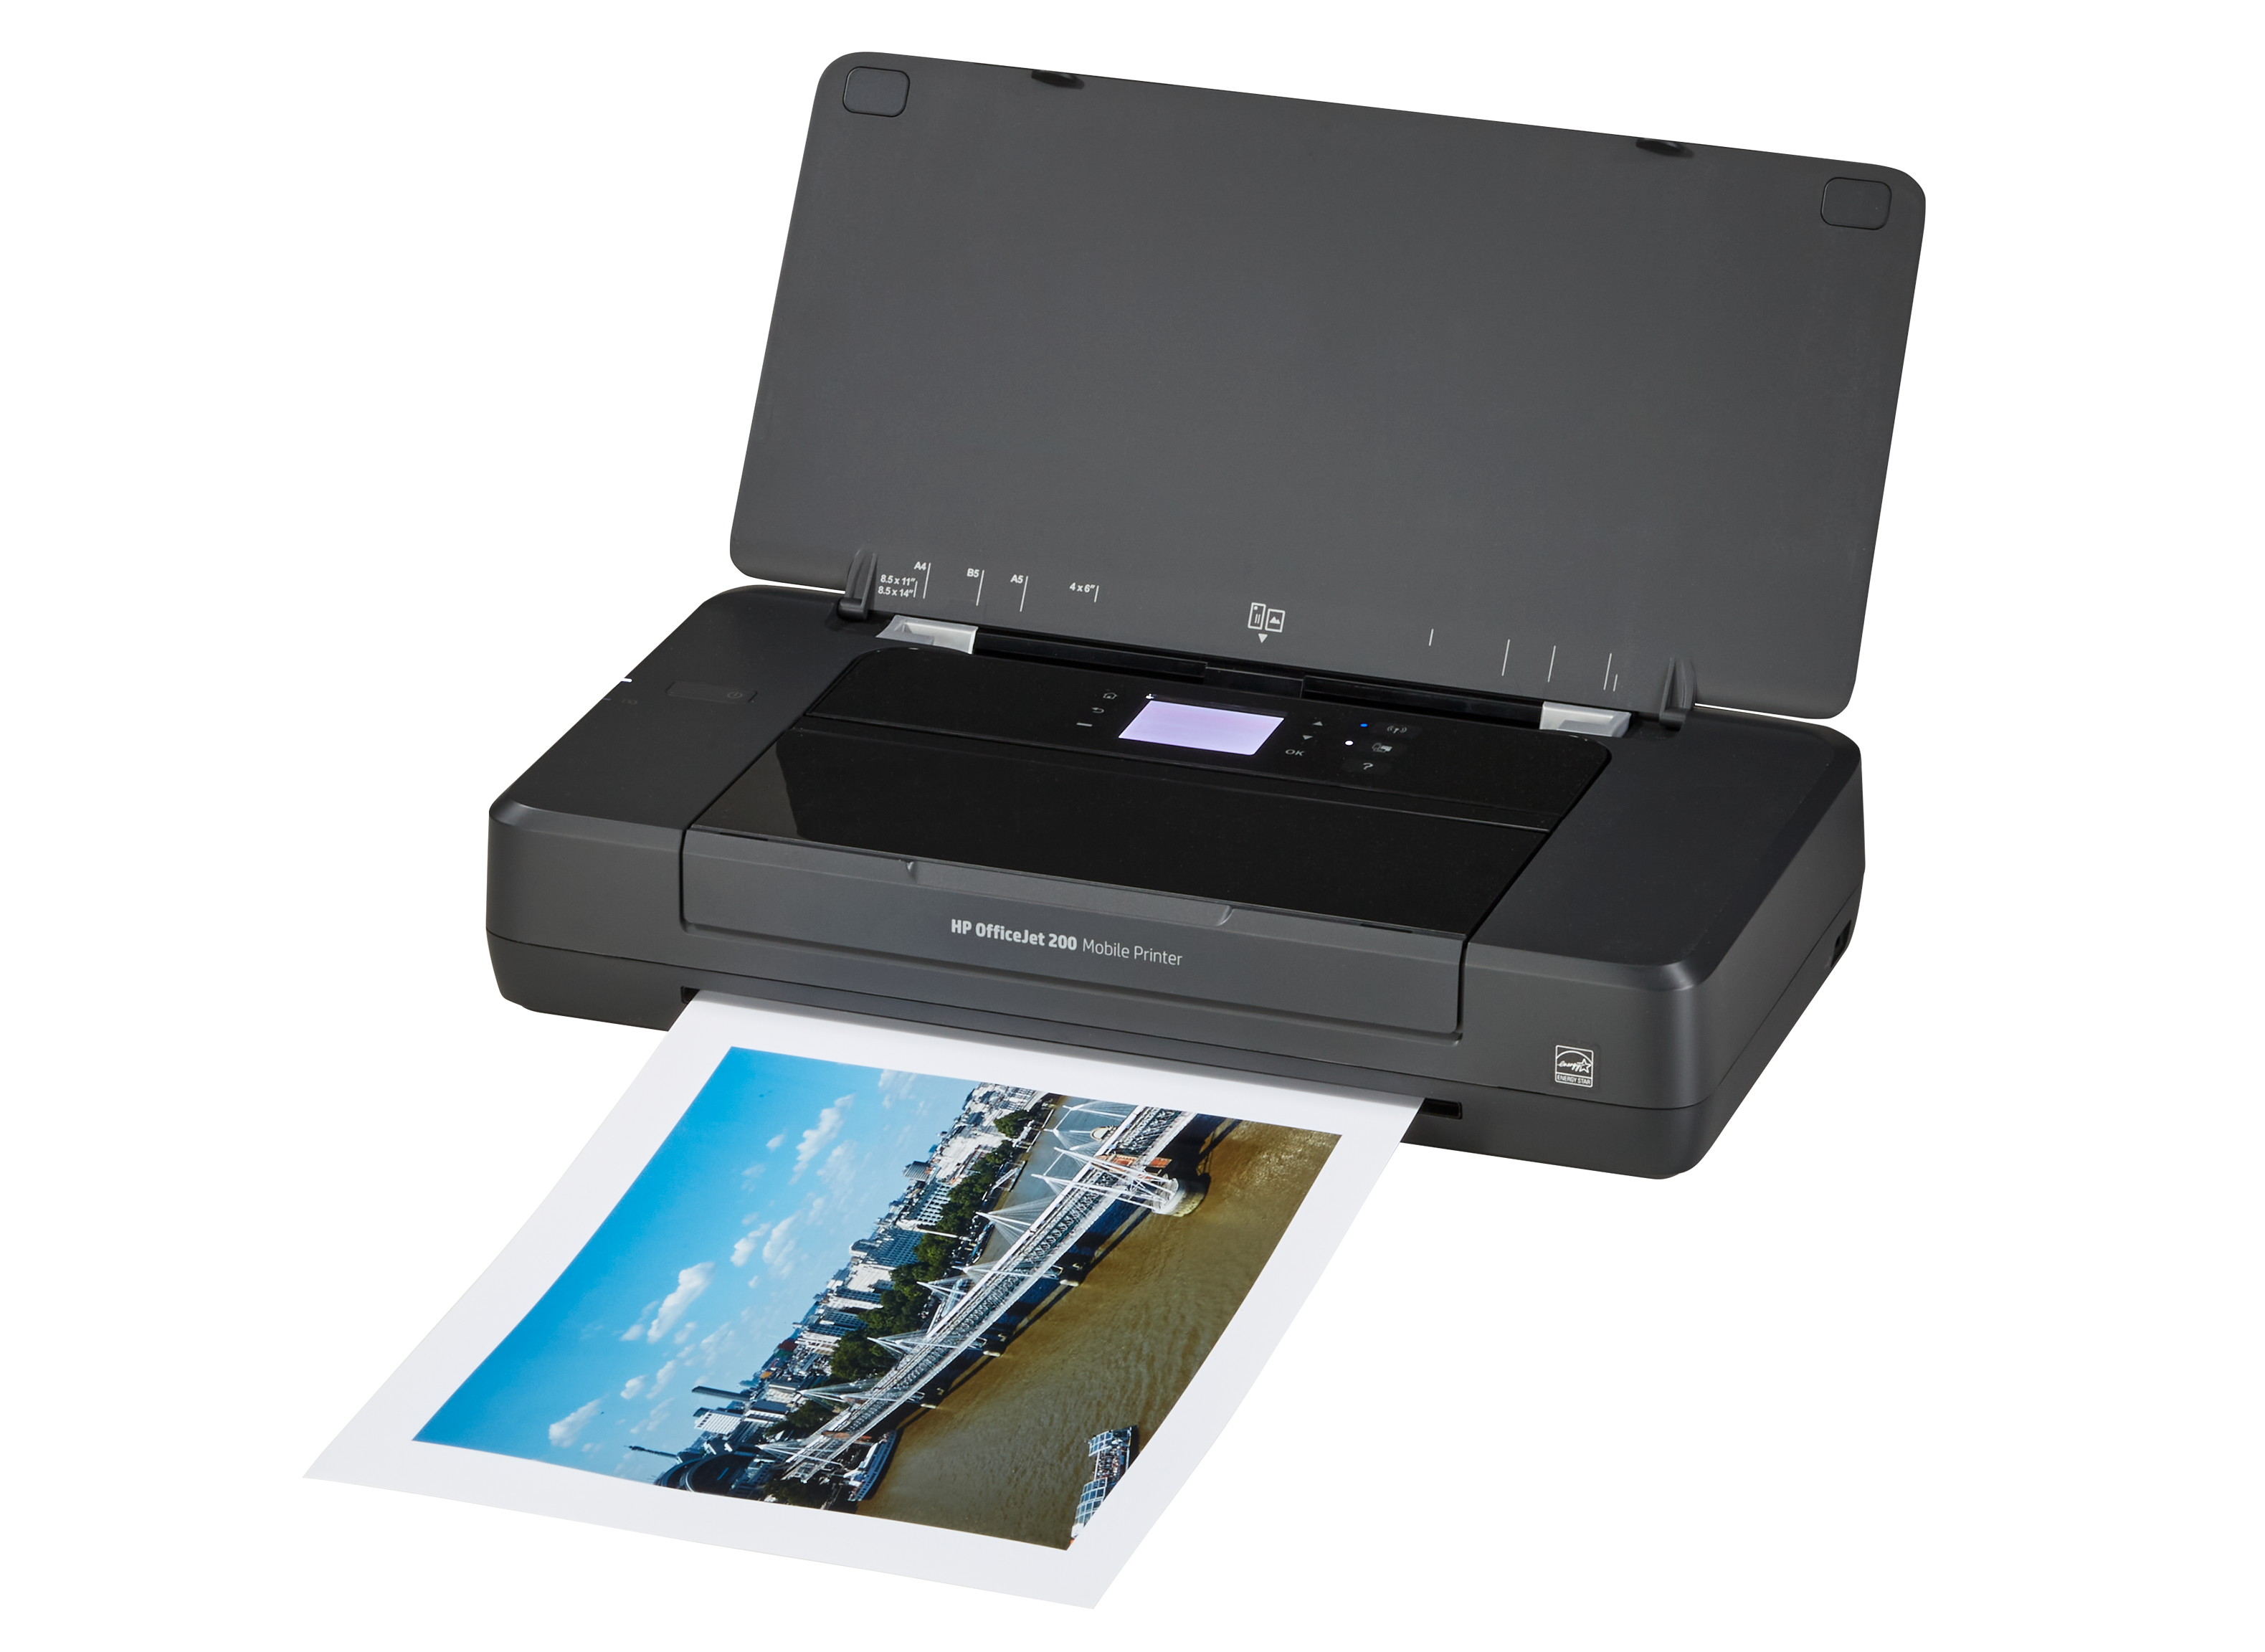 HP Officejet 200 Mobile Printer Review - Consumer Reports